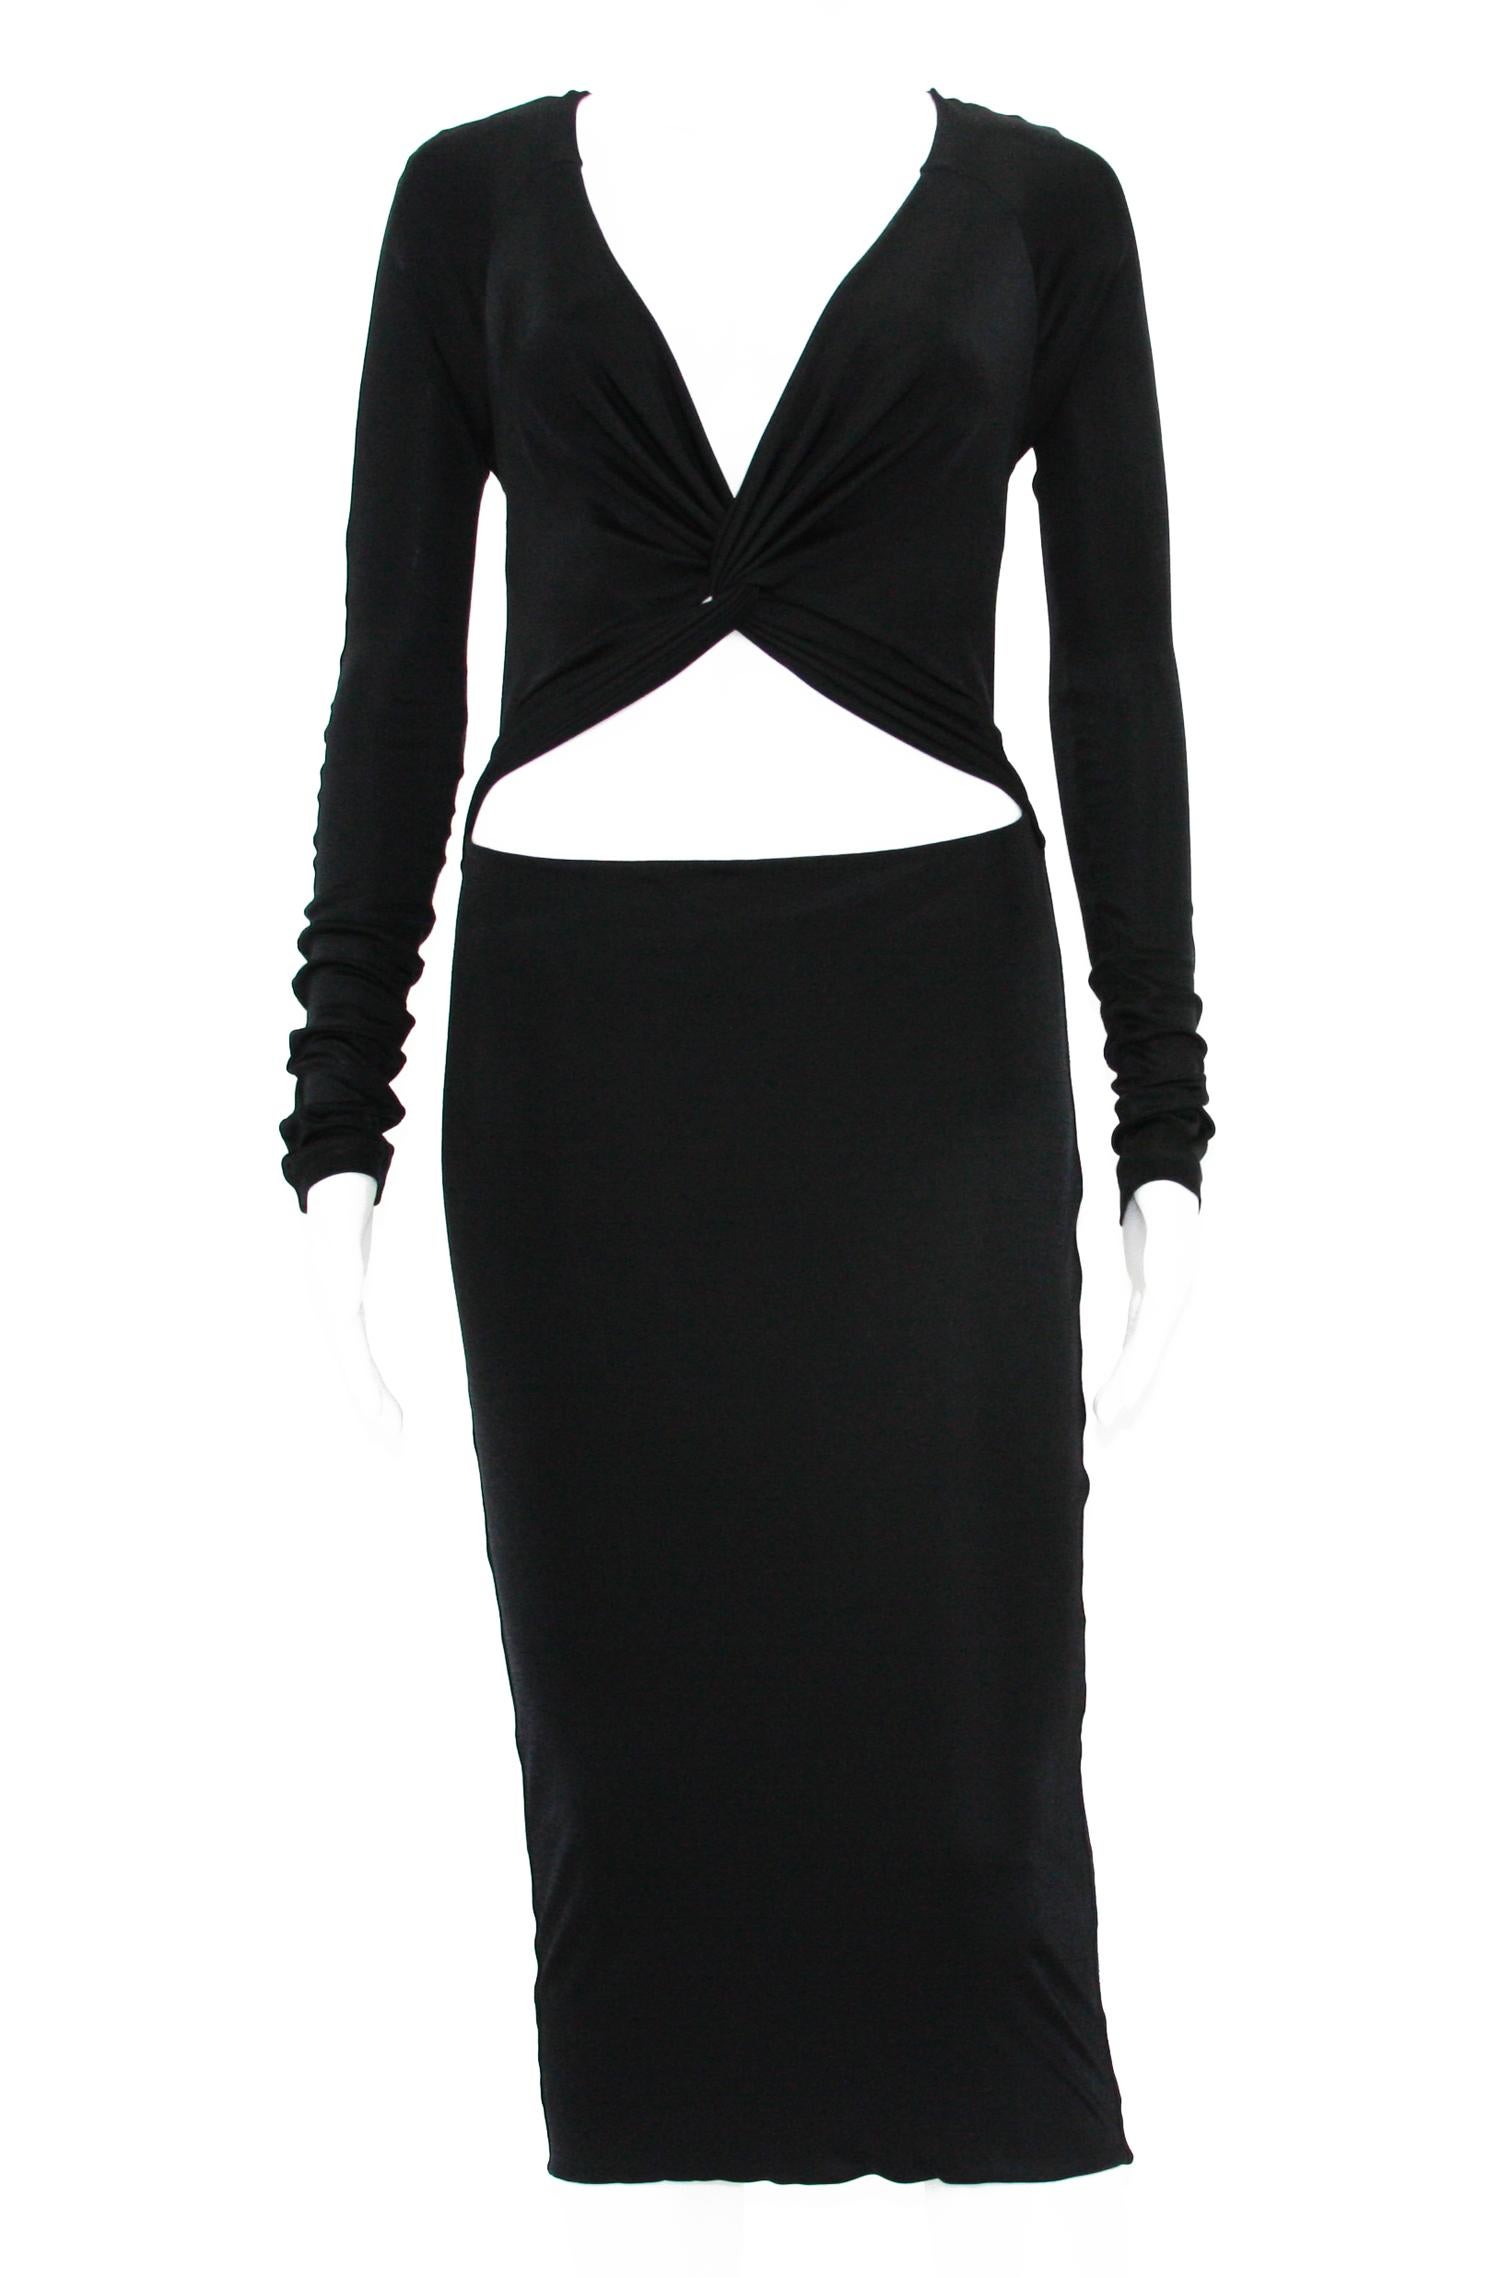 Tom Ford for Gucci 90's Sexy Cut Out Cocktail Dress
Designer size - M 
Black Stretch Jersey, Double Layered Skirt, Simple Slip On.
Made in Italy.
Excellent Condition.